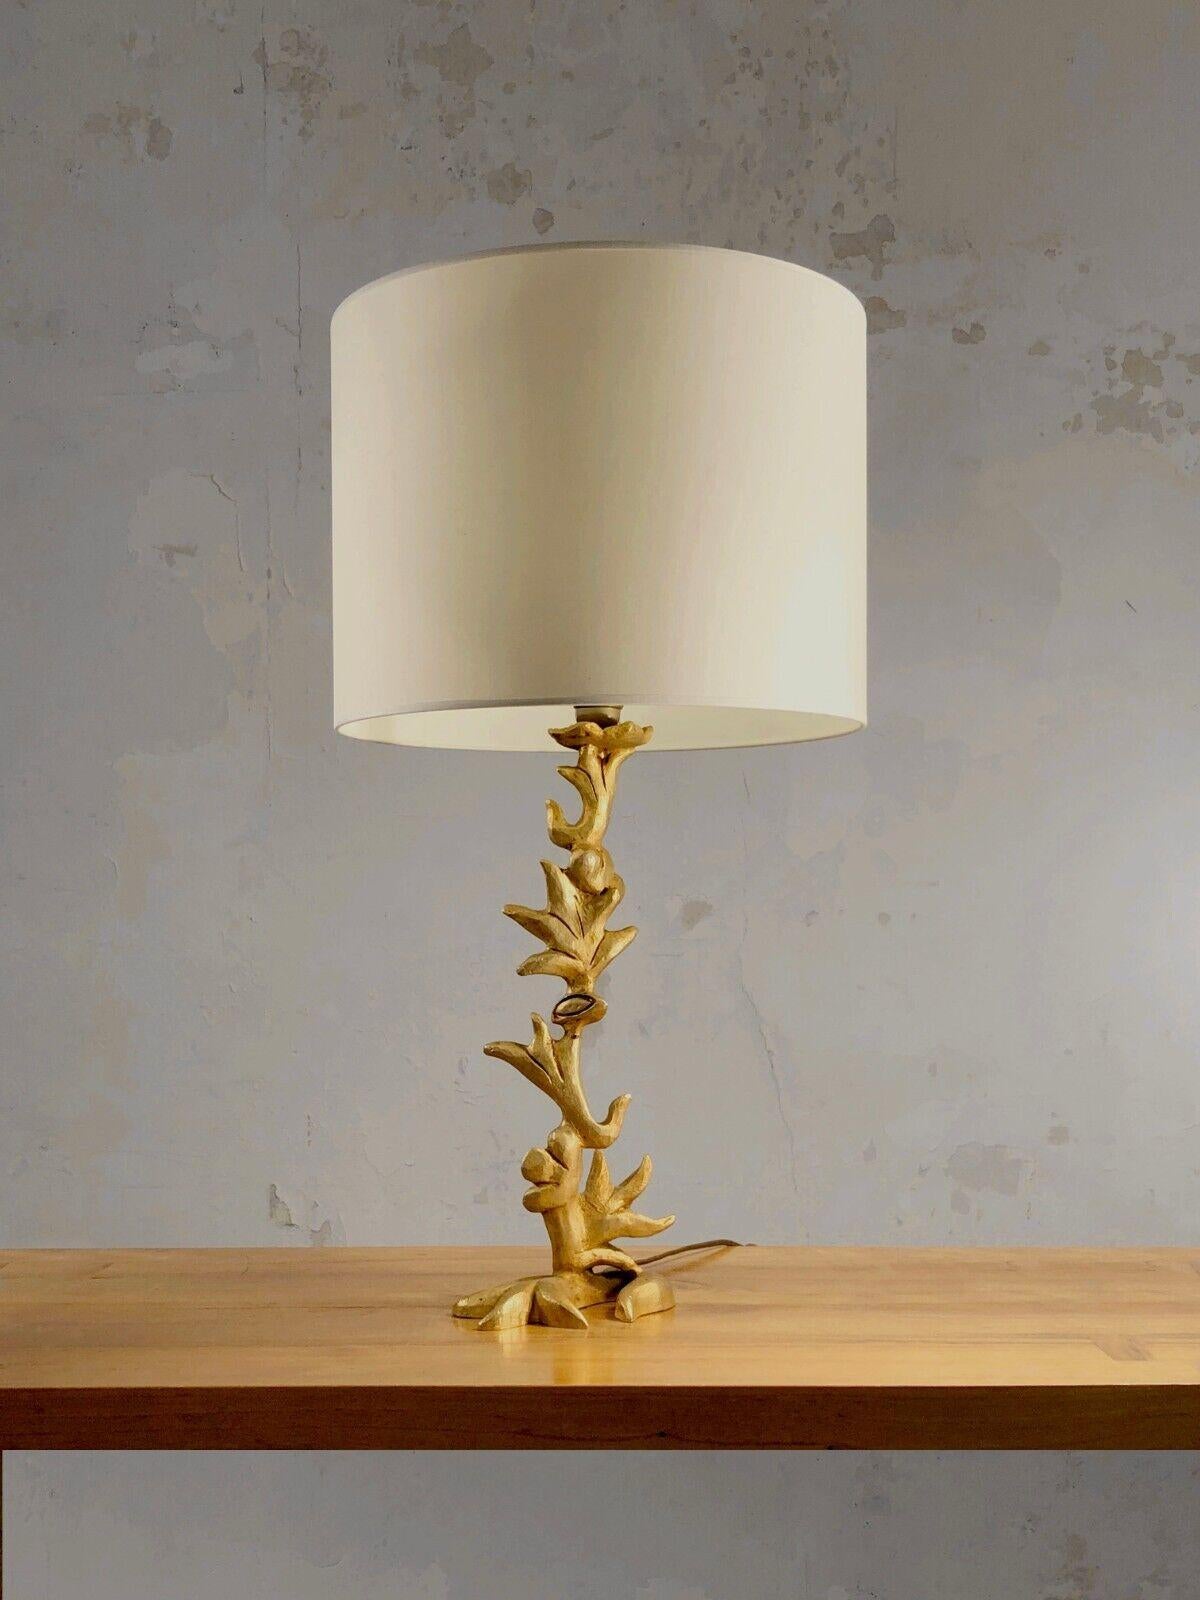 A spectacular and sculptural table lamp, Post-Modernist, Shabby-Chic, Memphis, plant-inspired base and cast gilt metal, signed at the base, by the sculptor Georges Mathias, Fondica edition, France 1980-1990.